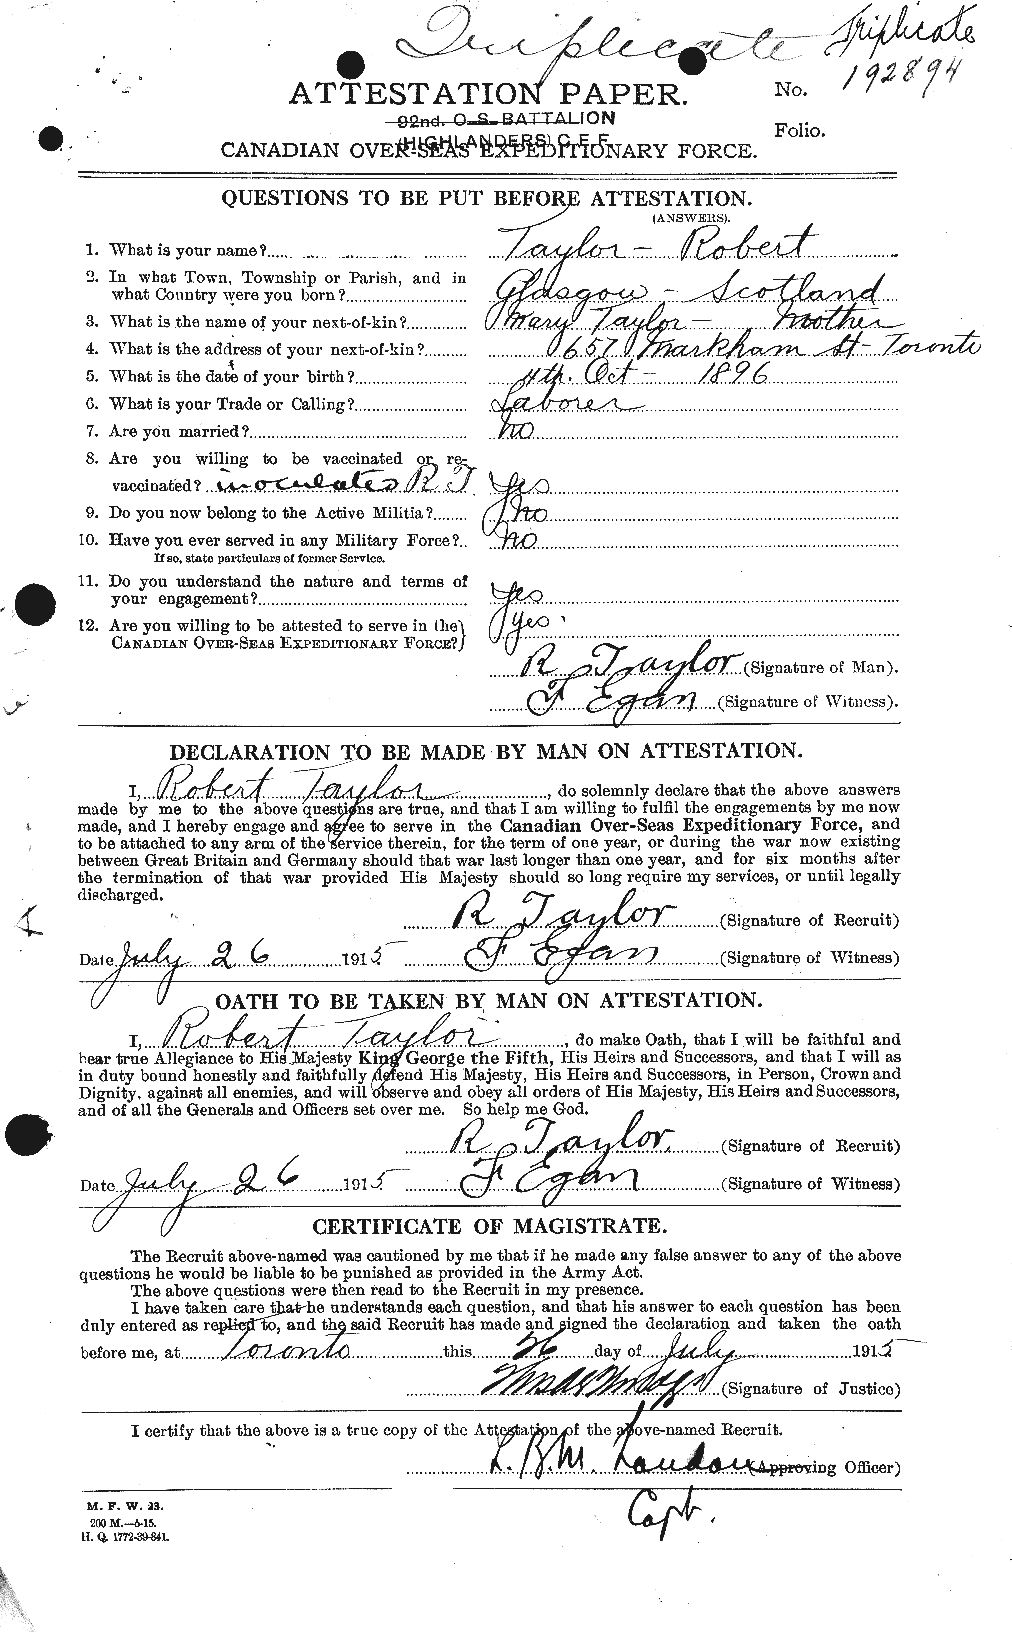 Personnel Records of the First World War - CEF 627438a